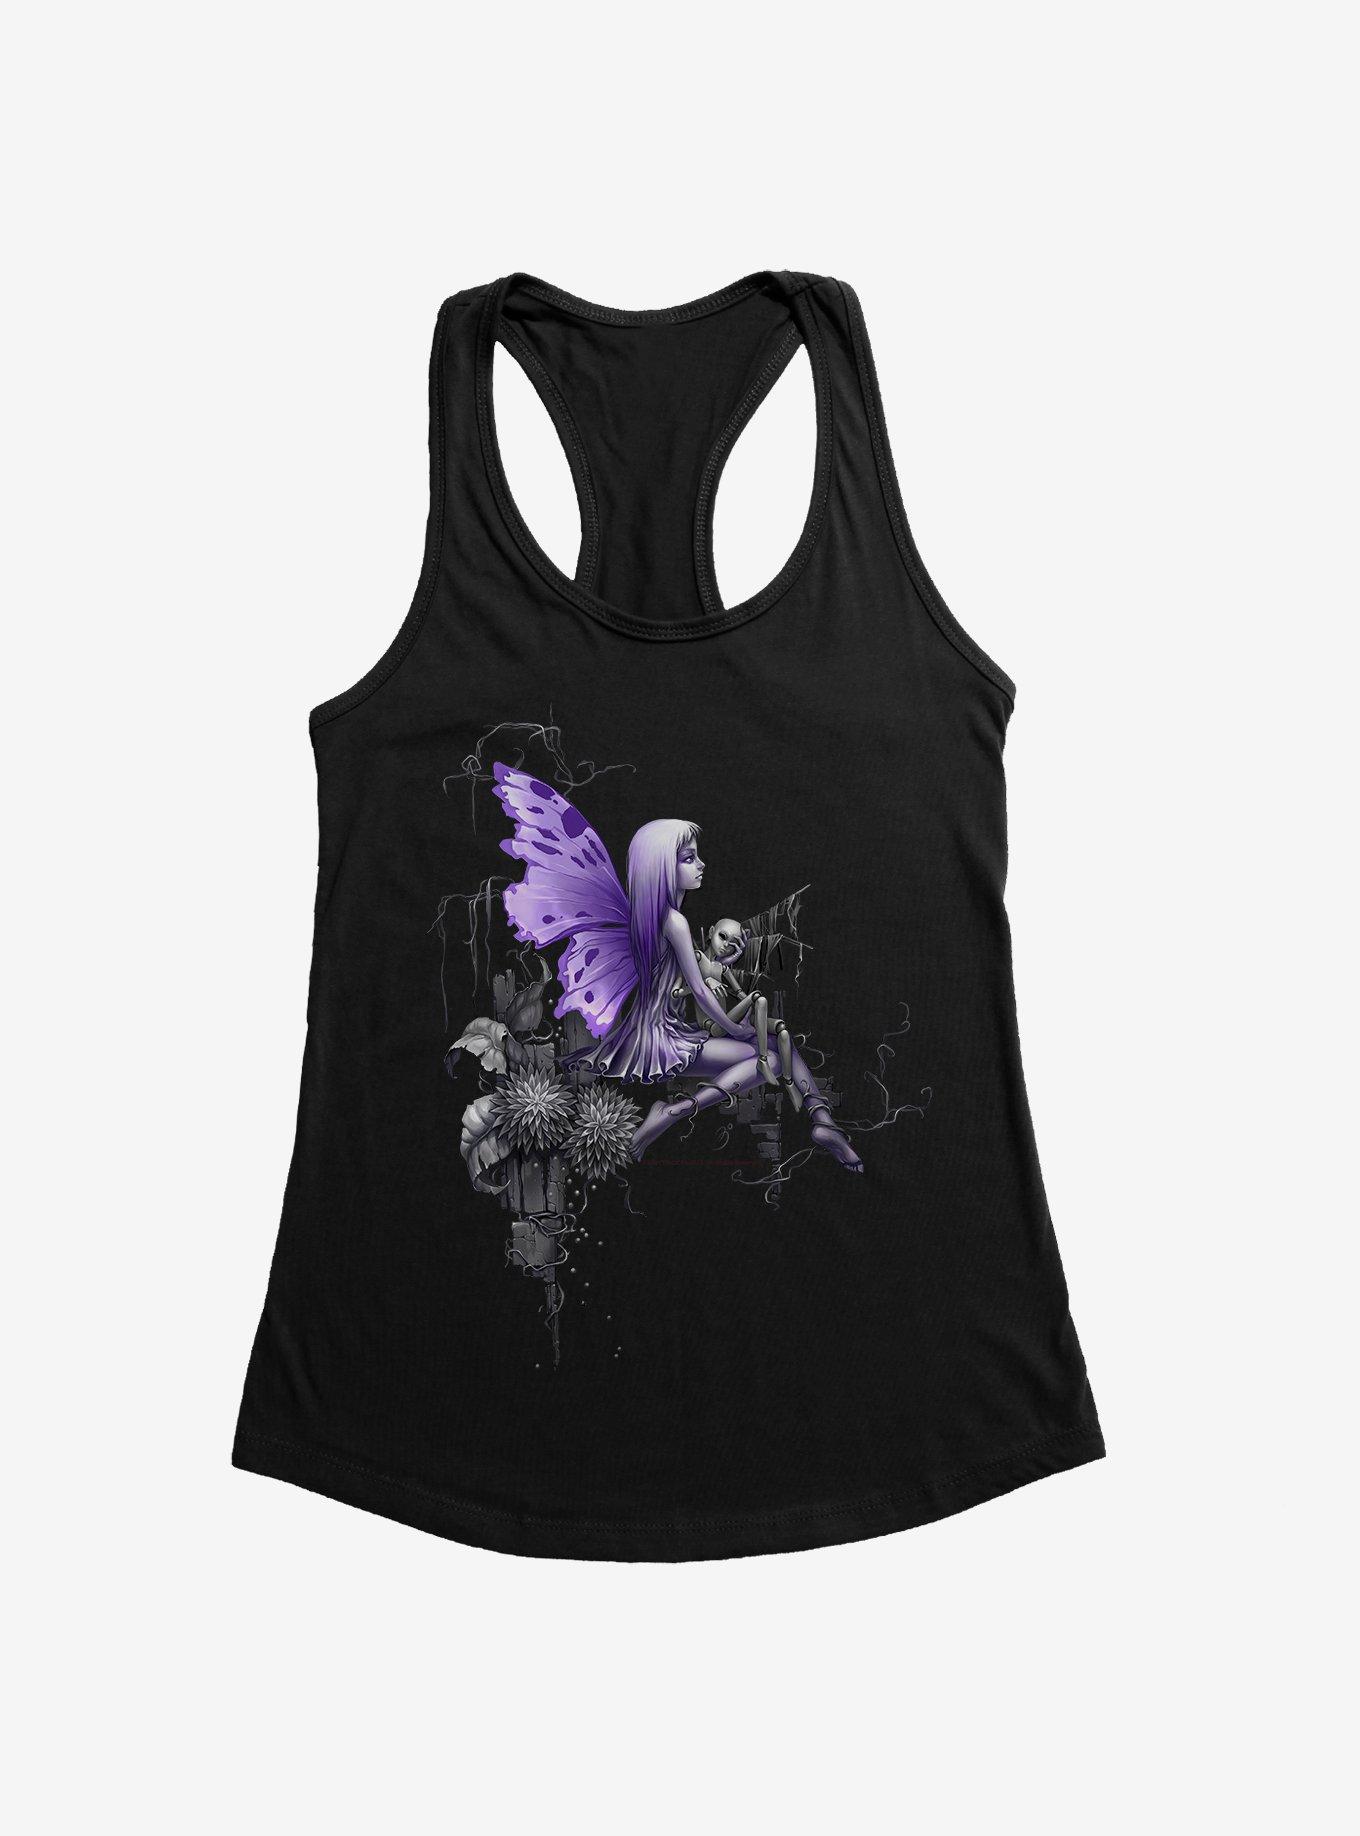 Fairies By Trick Wing Fairy Girls Tank